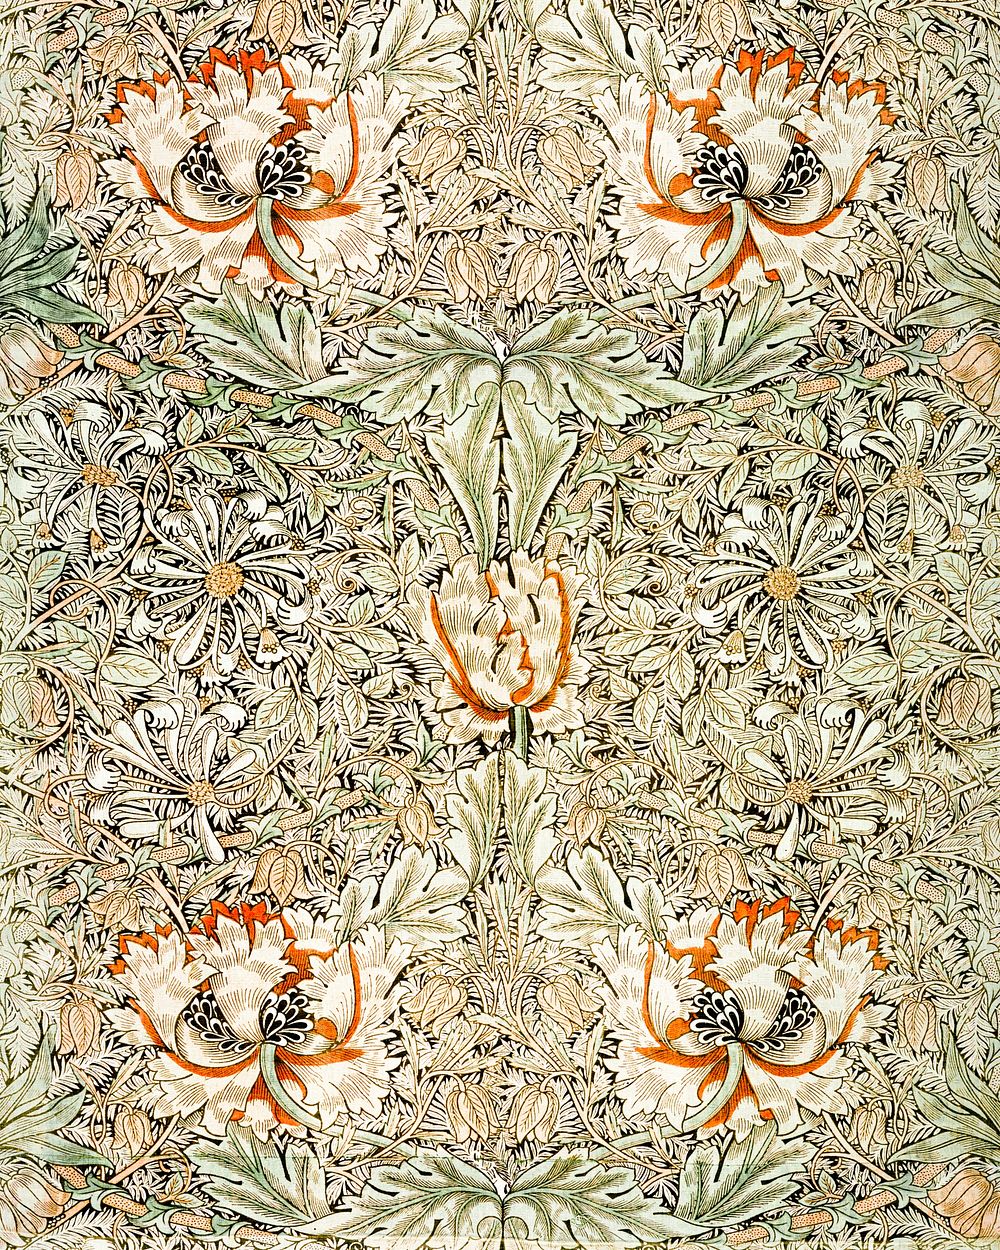 William Morris's Honeysuckle (1876) famous pattern. Original from The Smithsonian Institution. Digitally enhanced by…